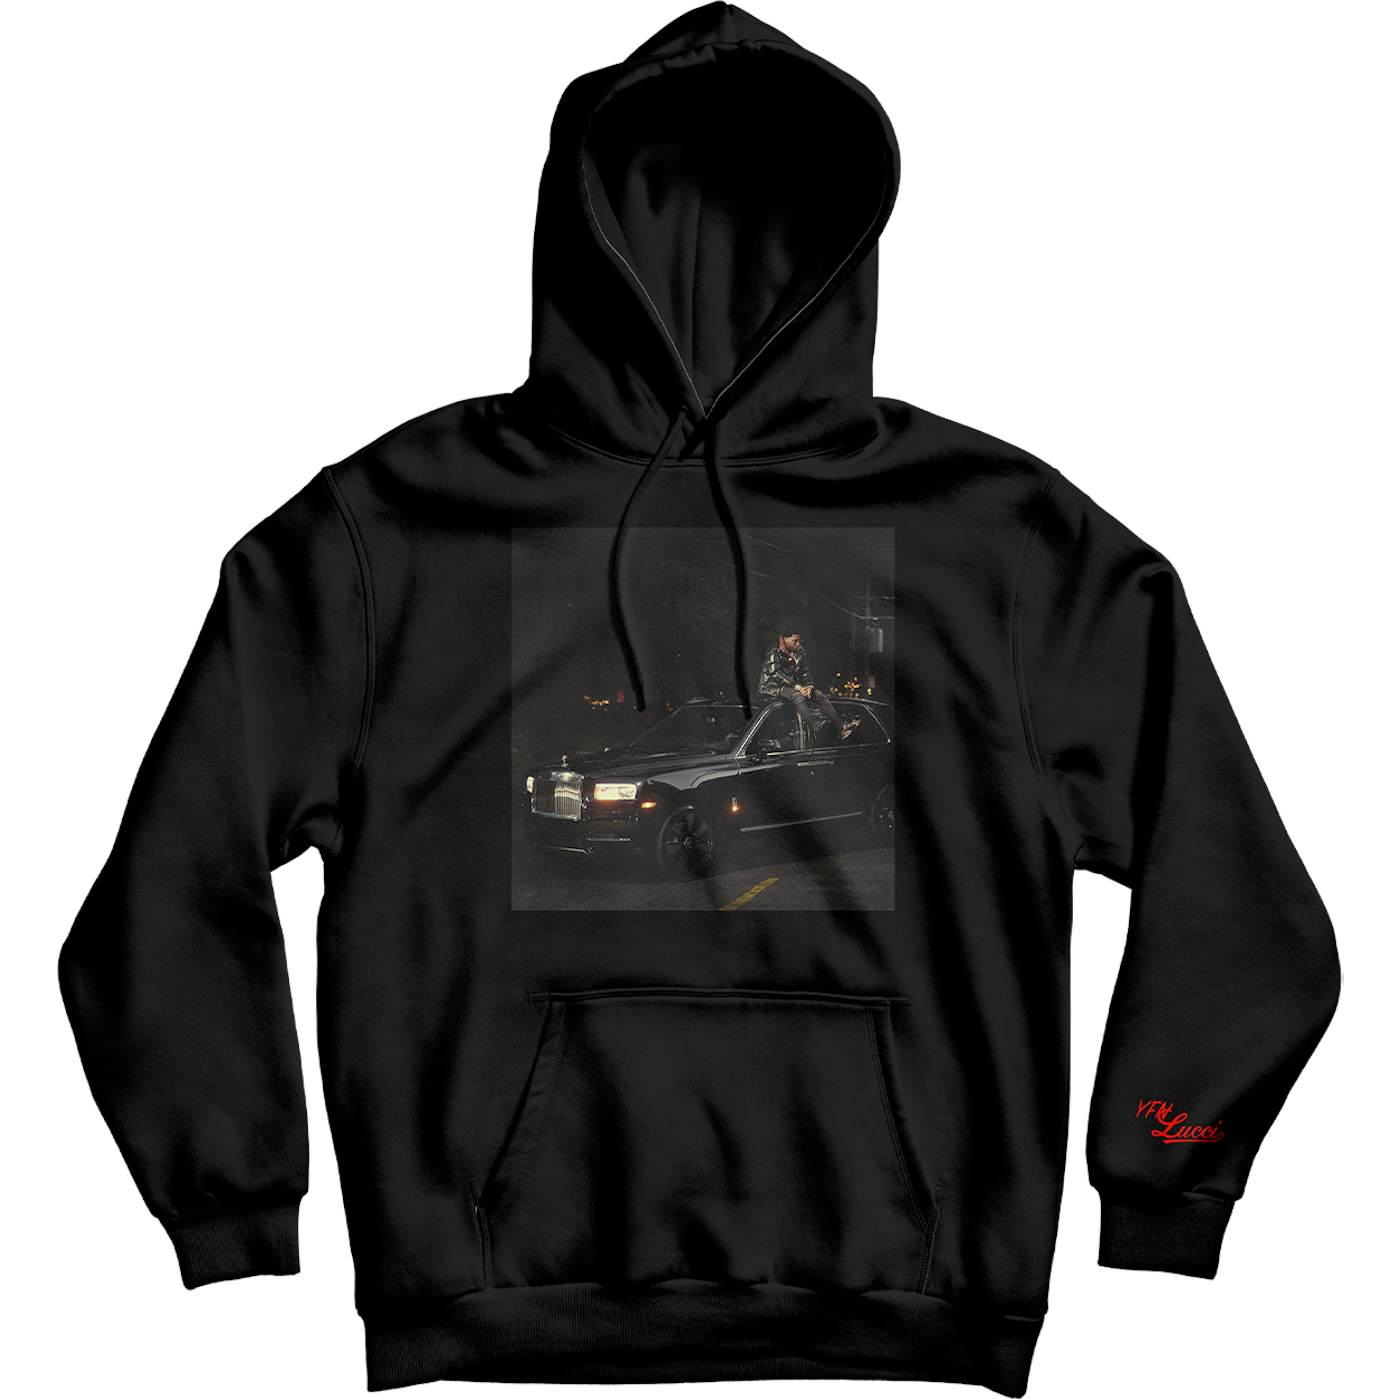 YFN Lucci Wish Me Well Cover Hoodie